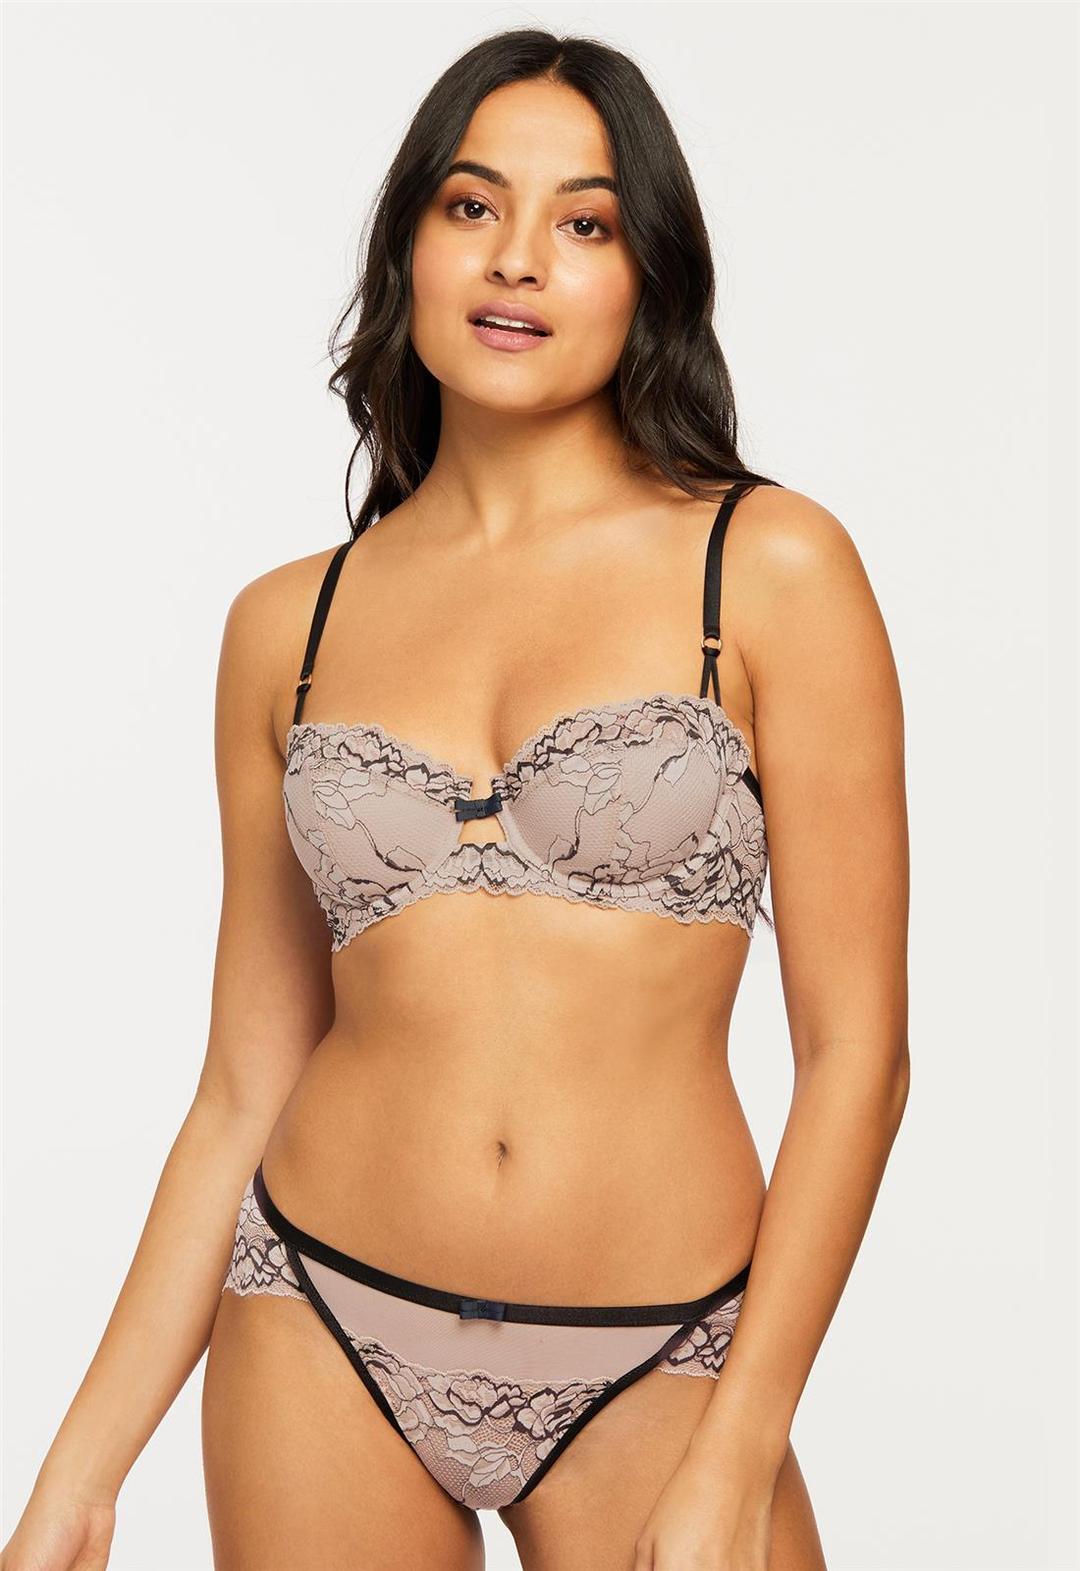 Scene: Men's Plus-Size Lingerie Coming To A Store Near You - 604 Now